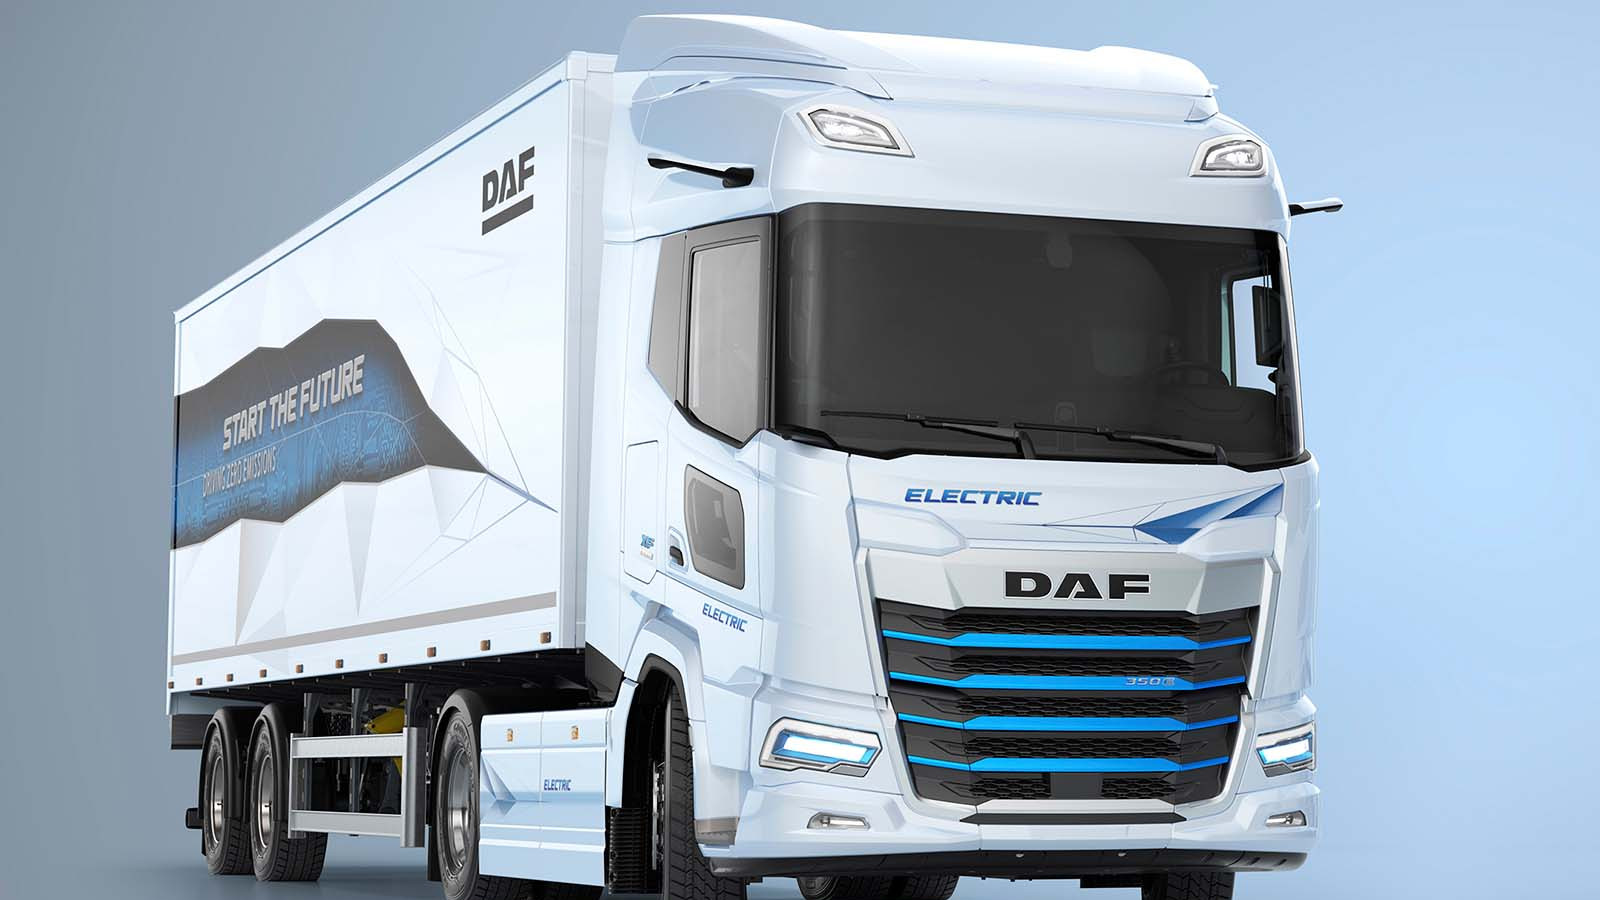 DAF shows two new electric trucks to launch in 2023